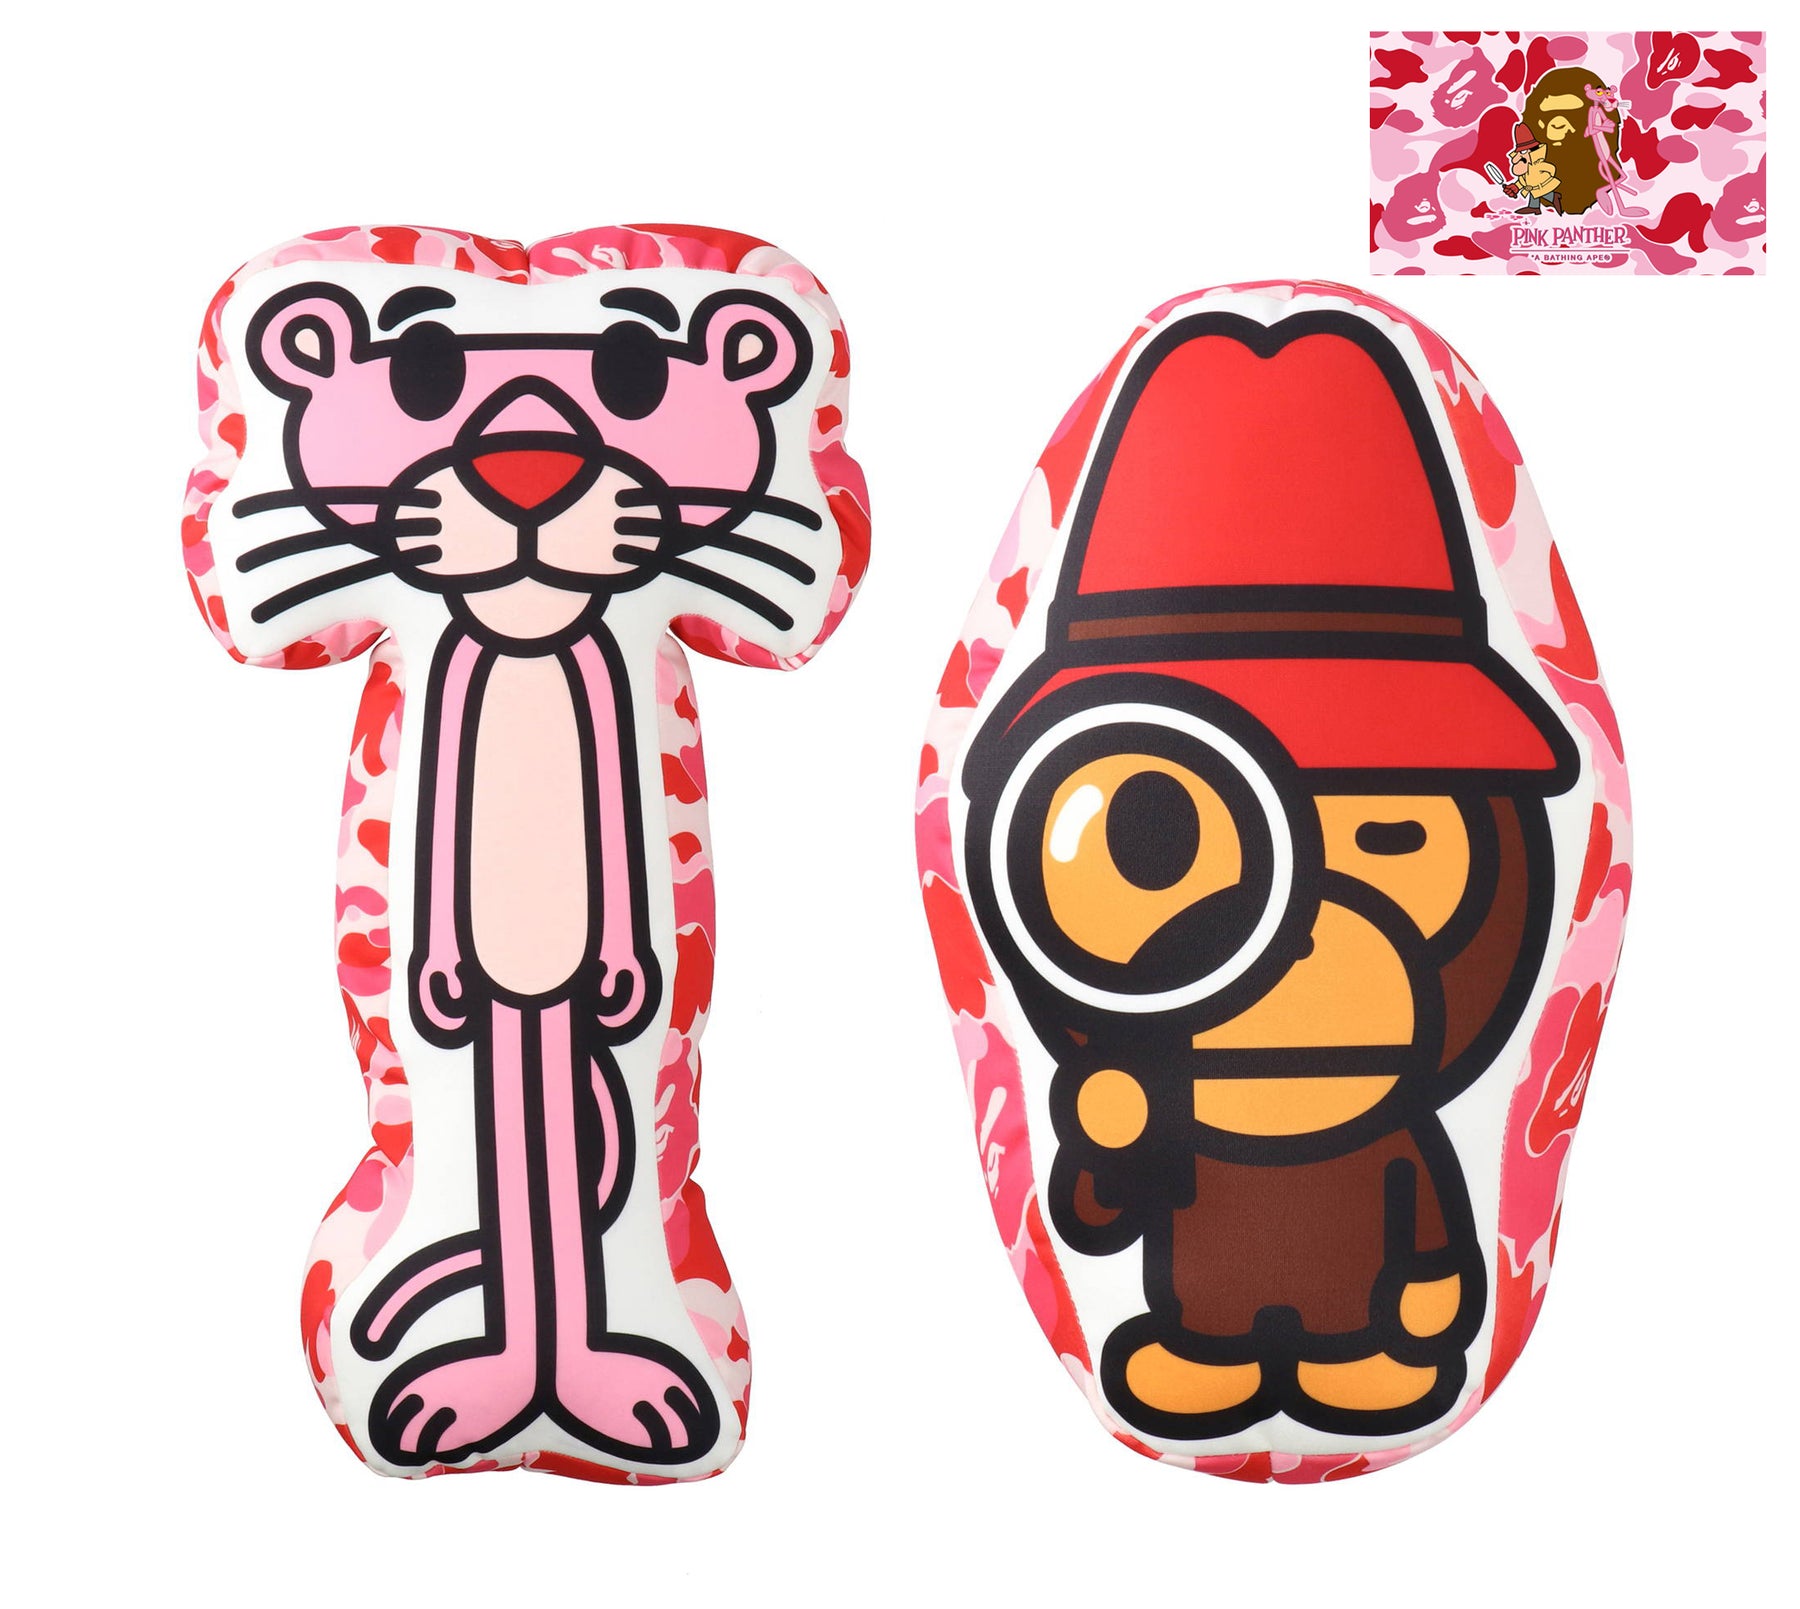 A BATHING APE BAPE x PINK PANTHER BABY MILO FLUFFY BEADS CUSHION